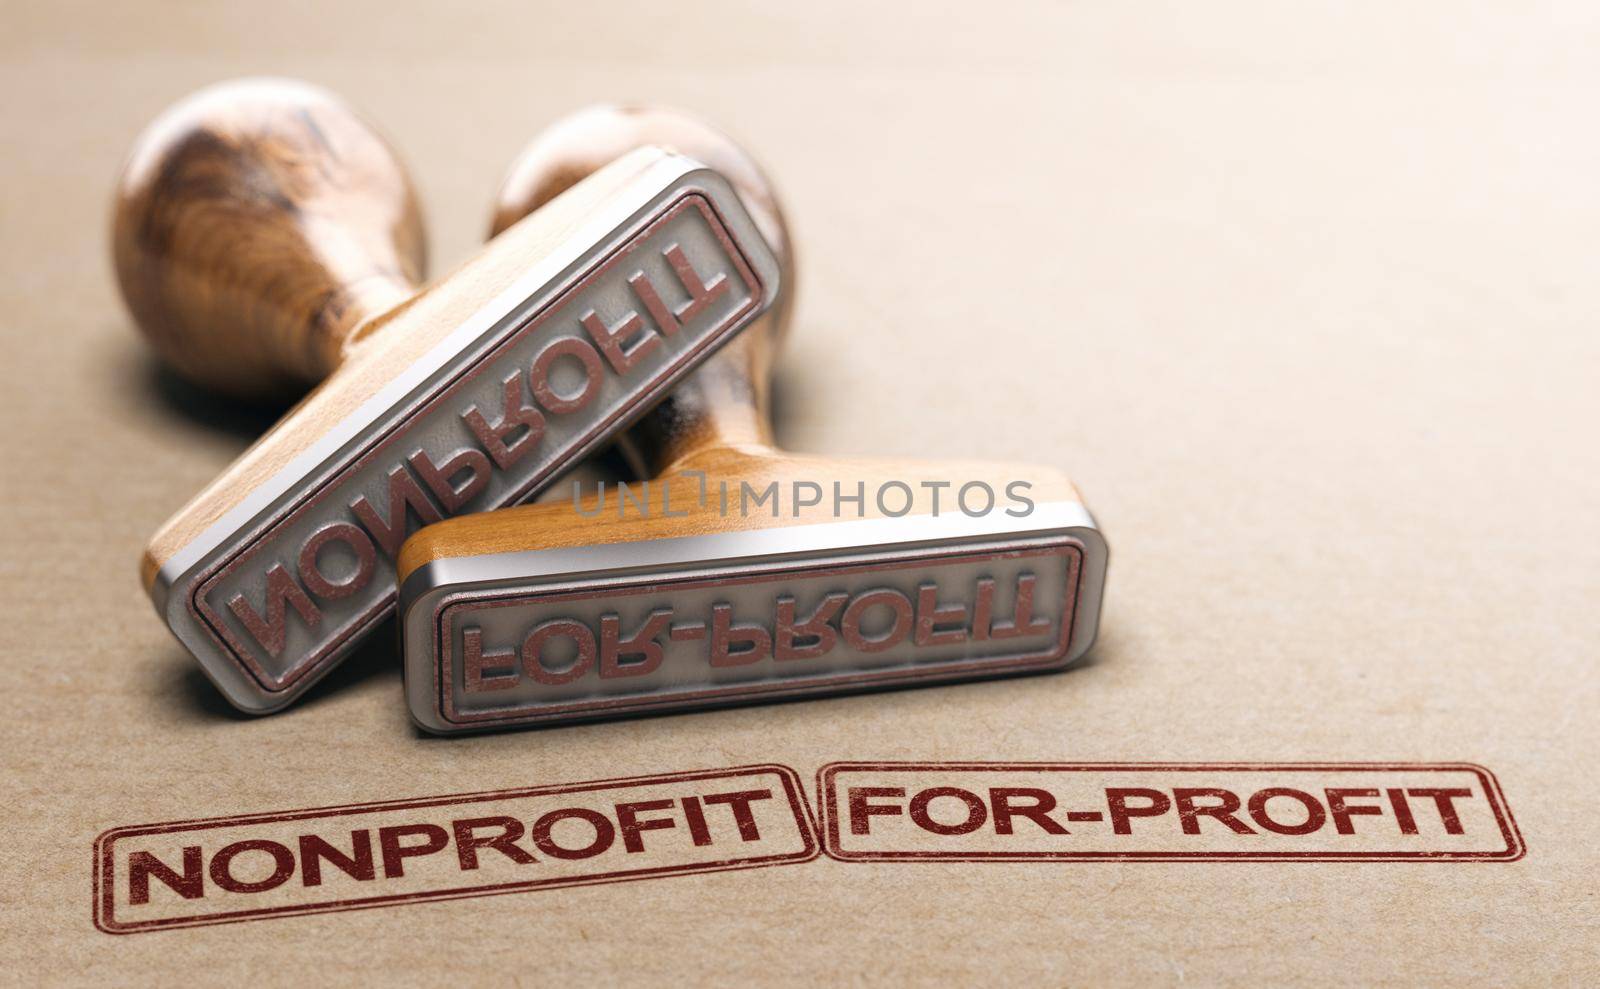 Nonprofit and for-profit printed on paper background with two rubber stamps. 3d illustration.